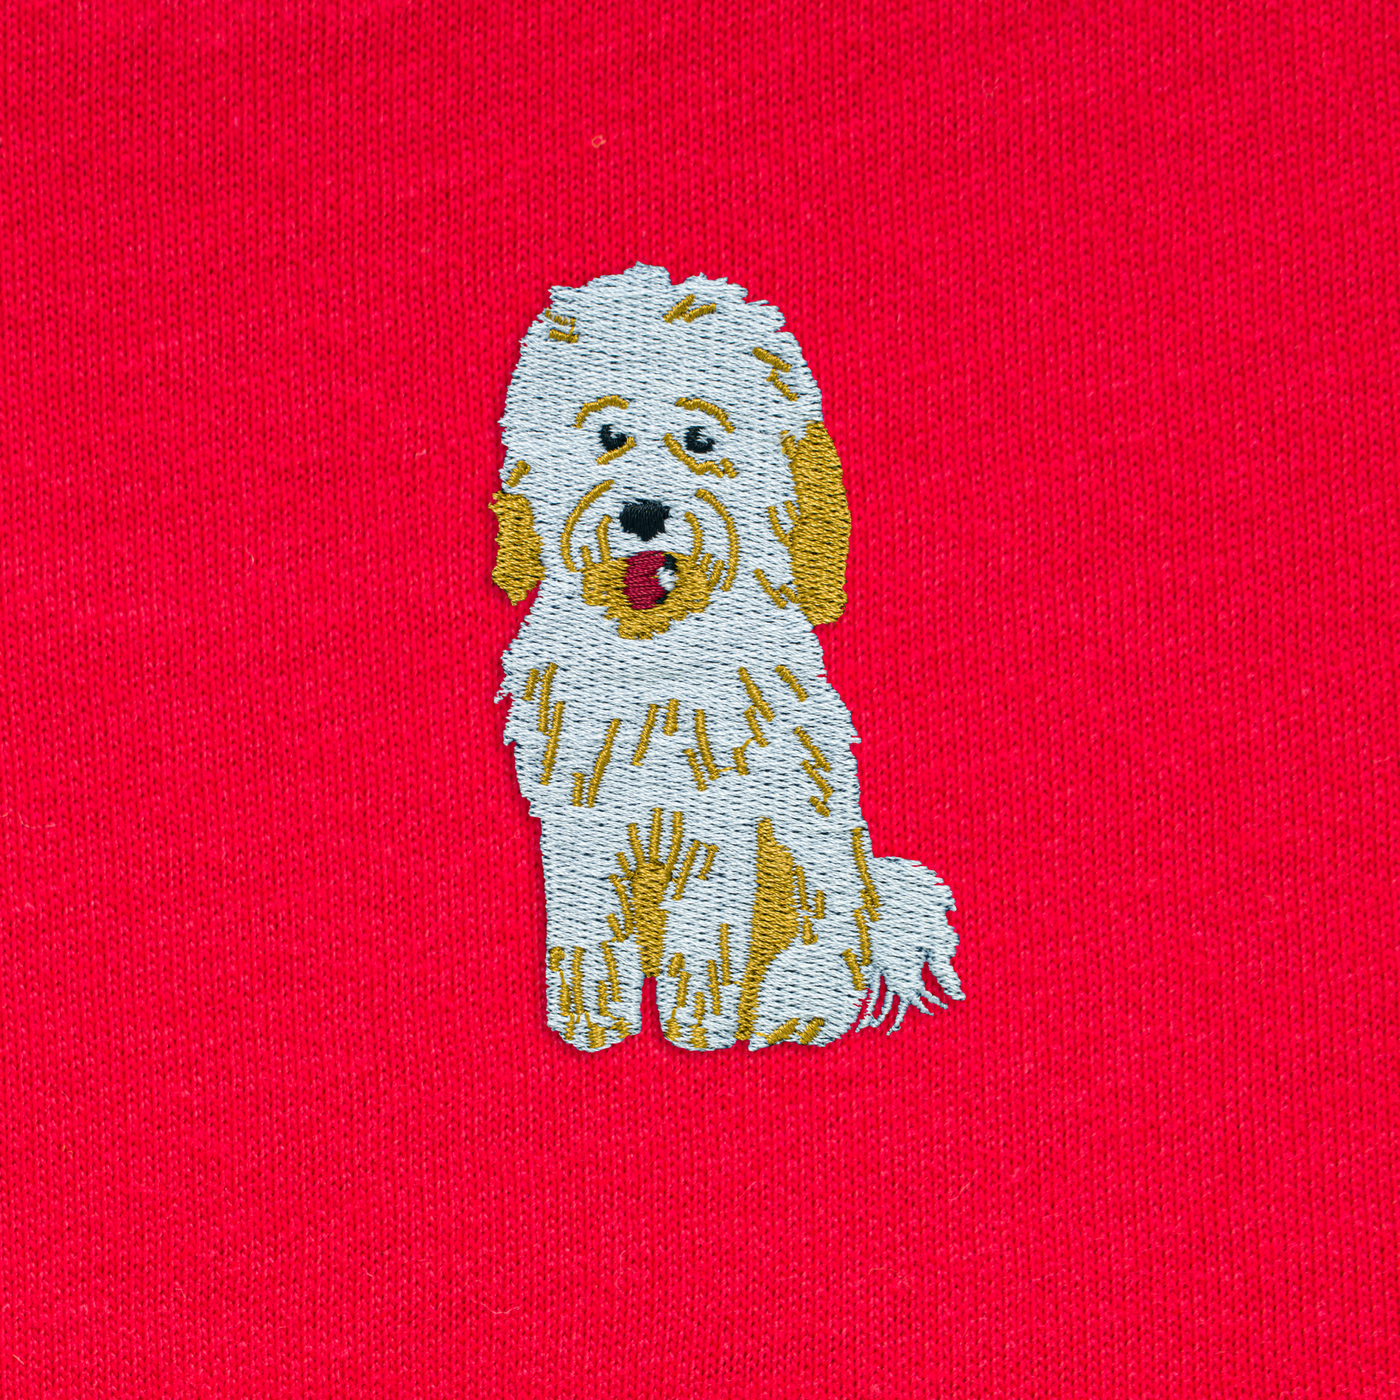 Bobby's Planet Kids Embroidered Poodle T-Shirt from Bobbys Planet Toy Poodle Collection in Red Color#color_red